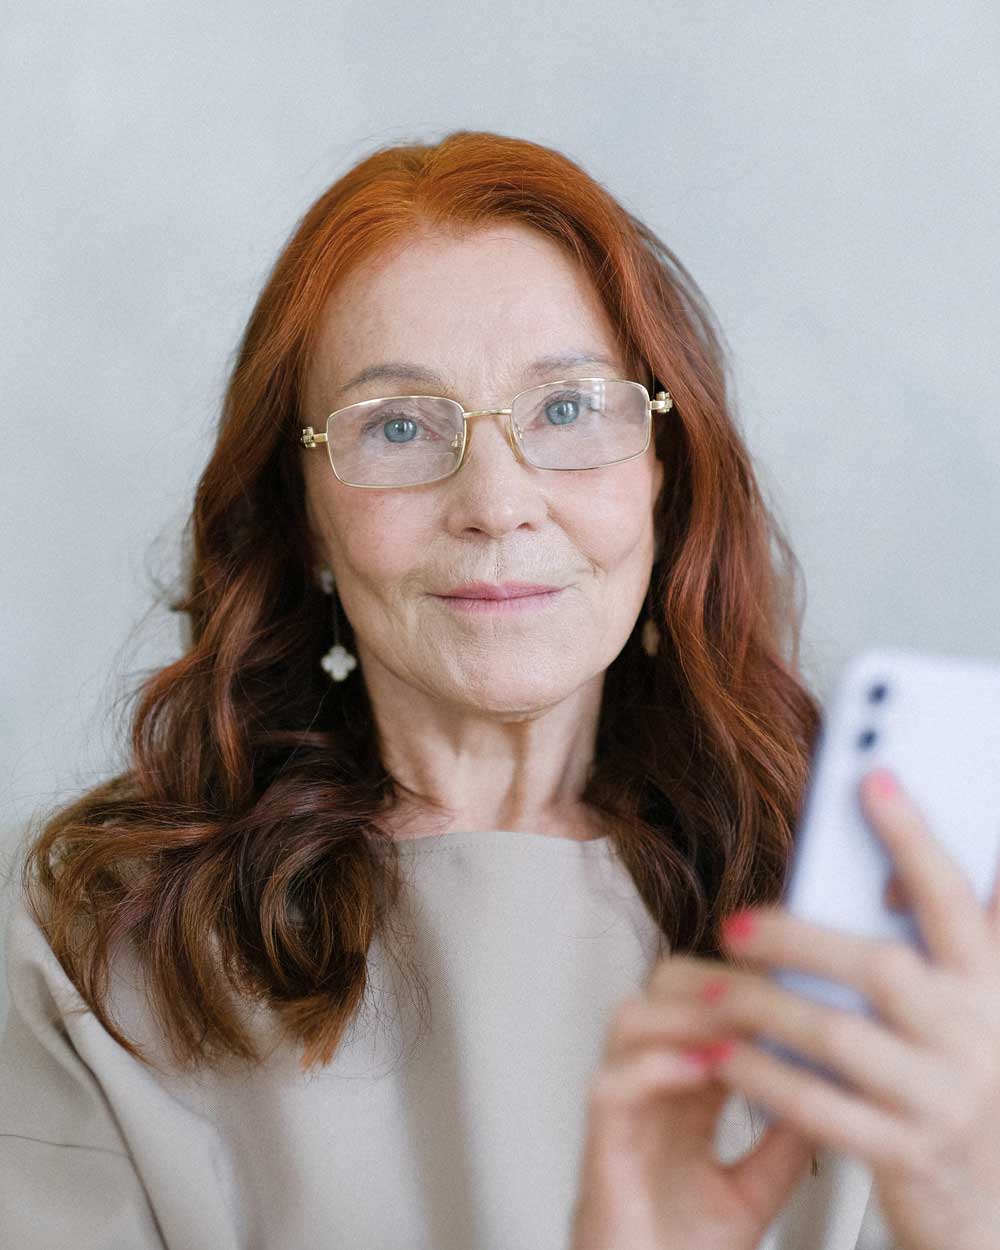 Ginger haired women wearing rimless spectacles holding her cell phone